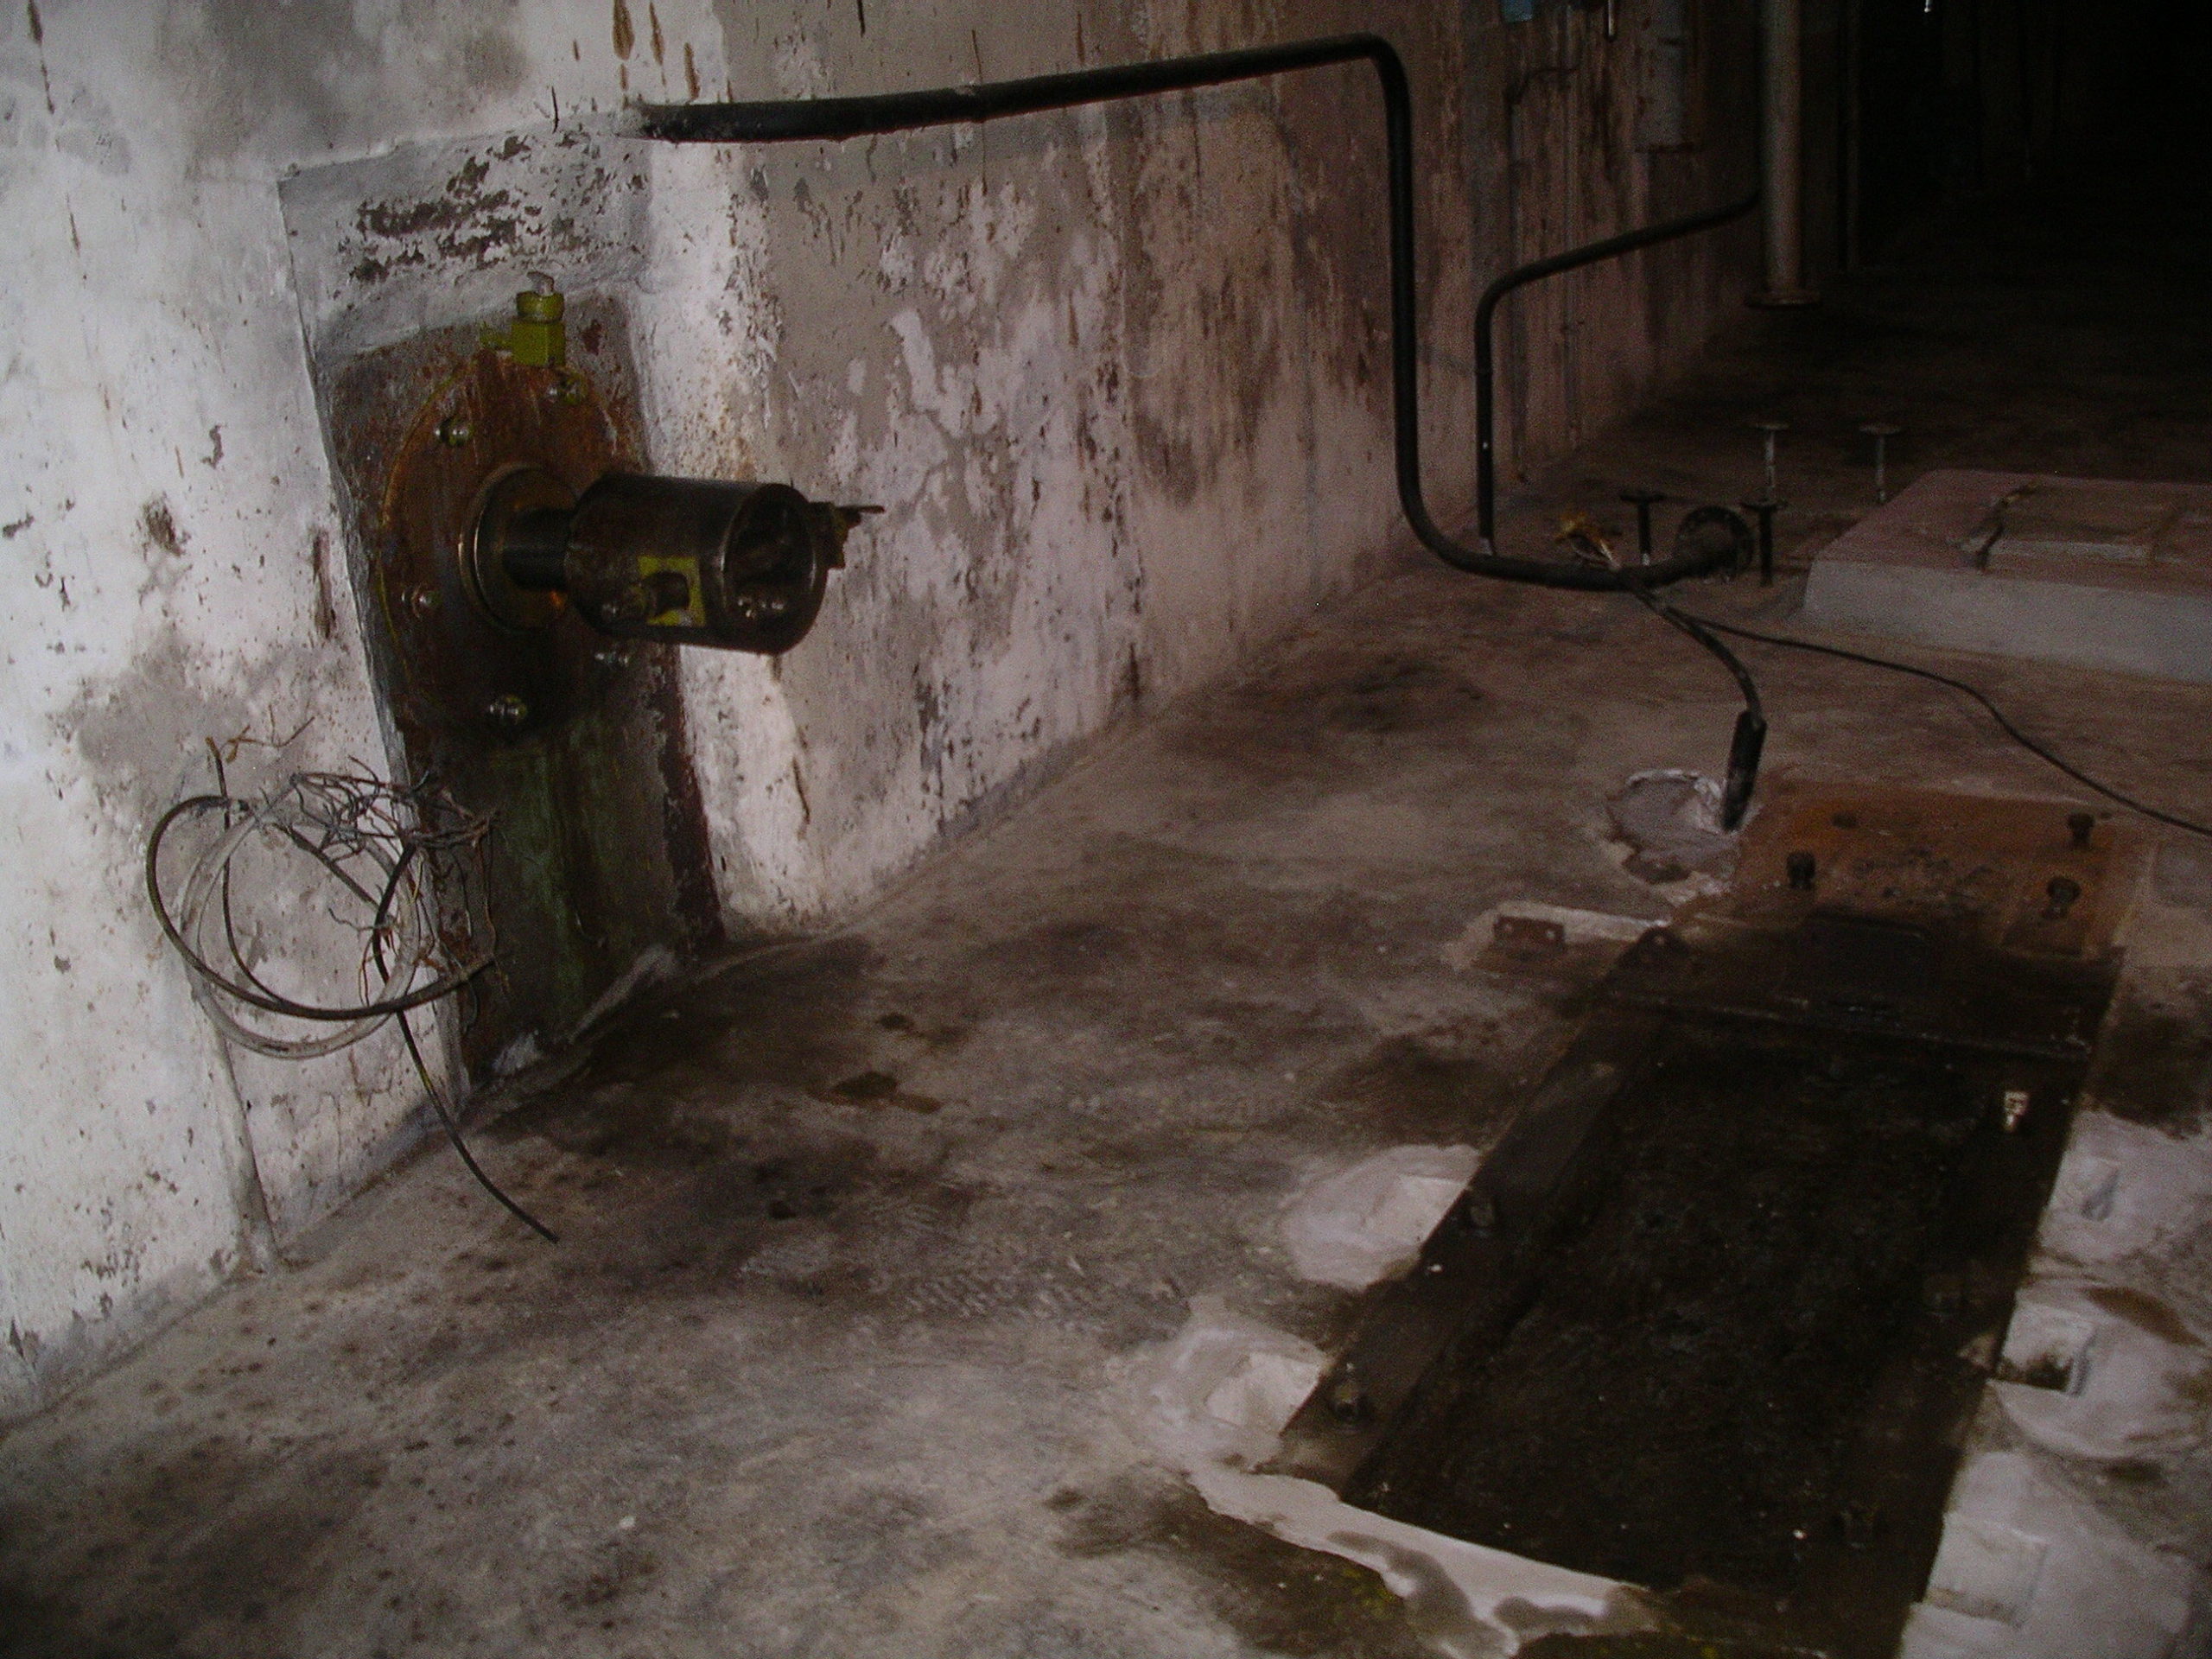 Metal structures and an orifice in the concrete floor